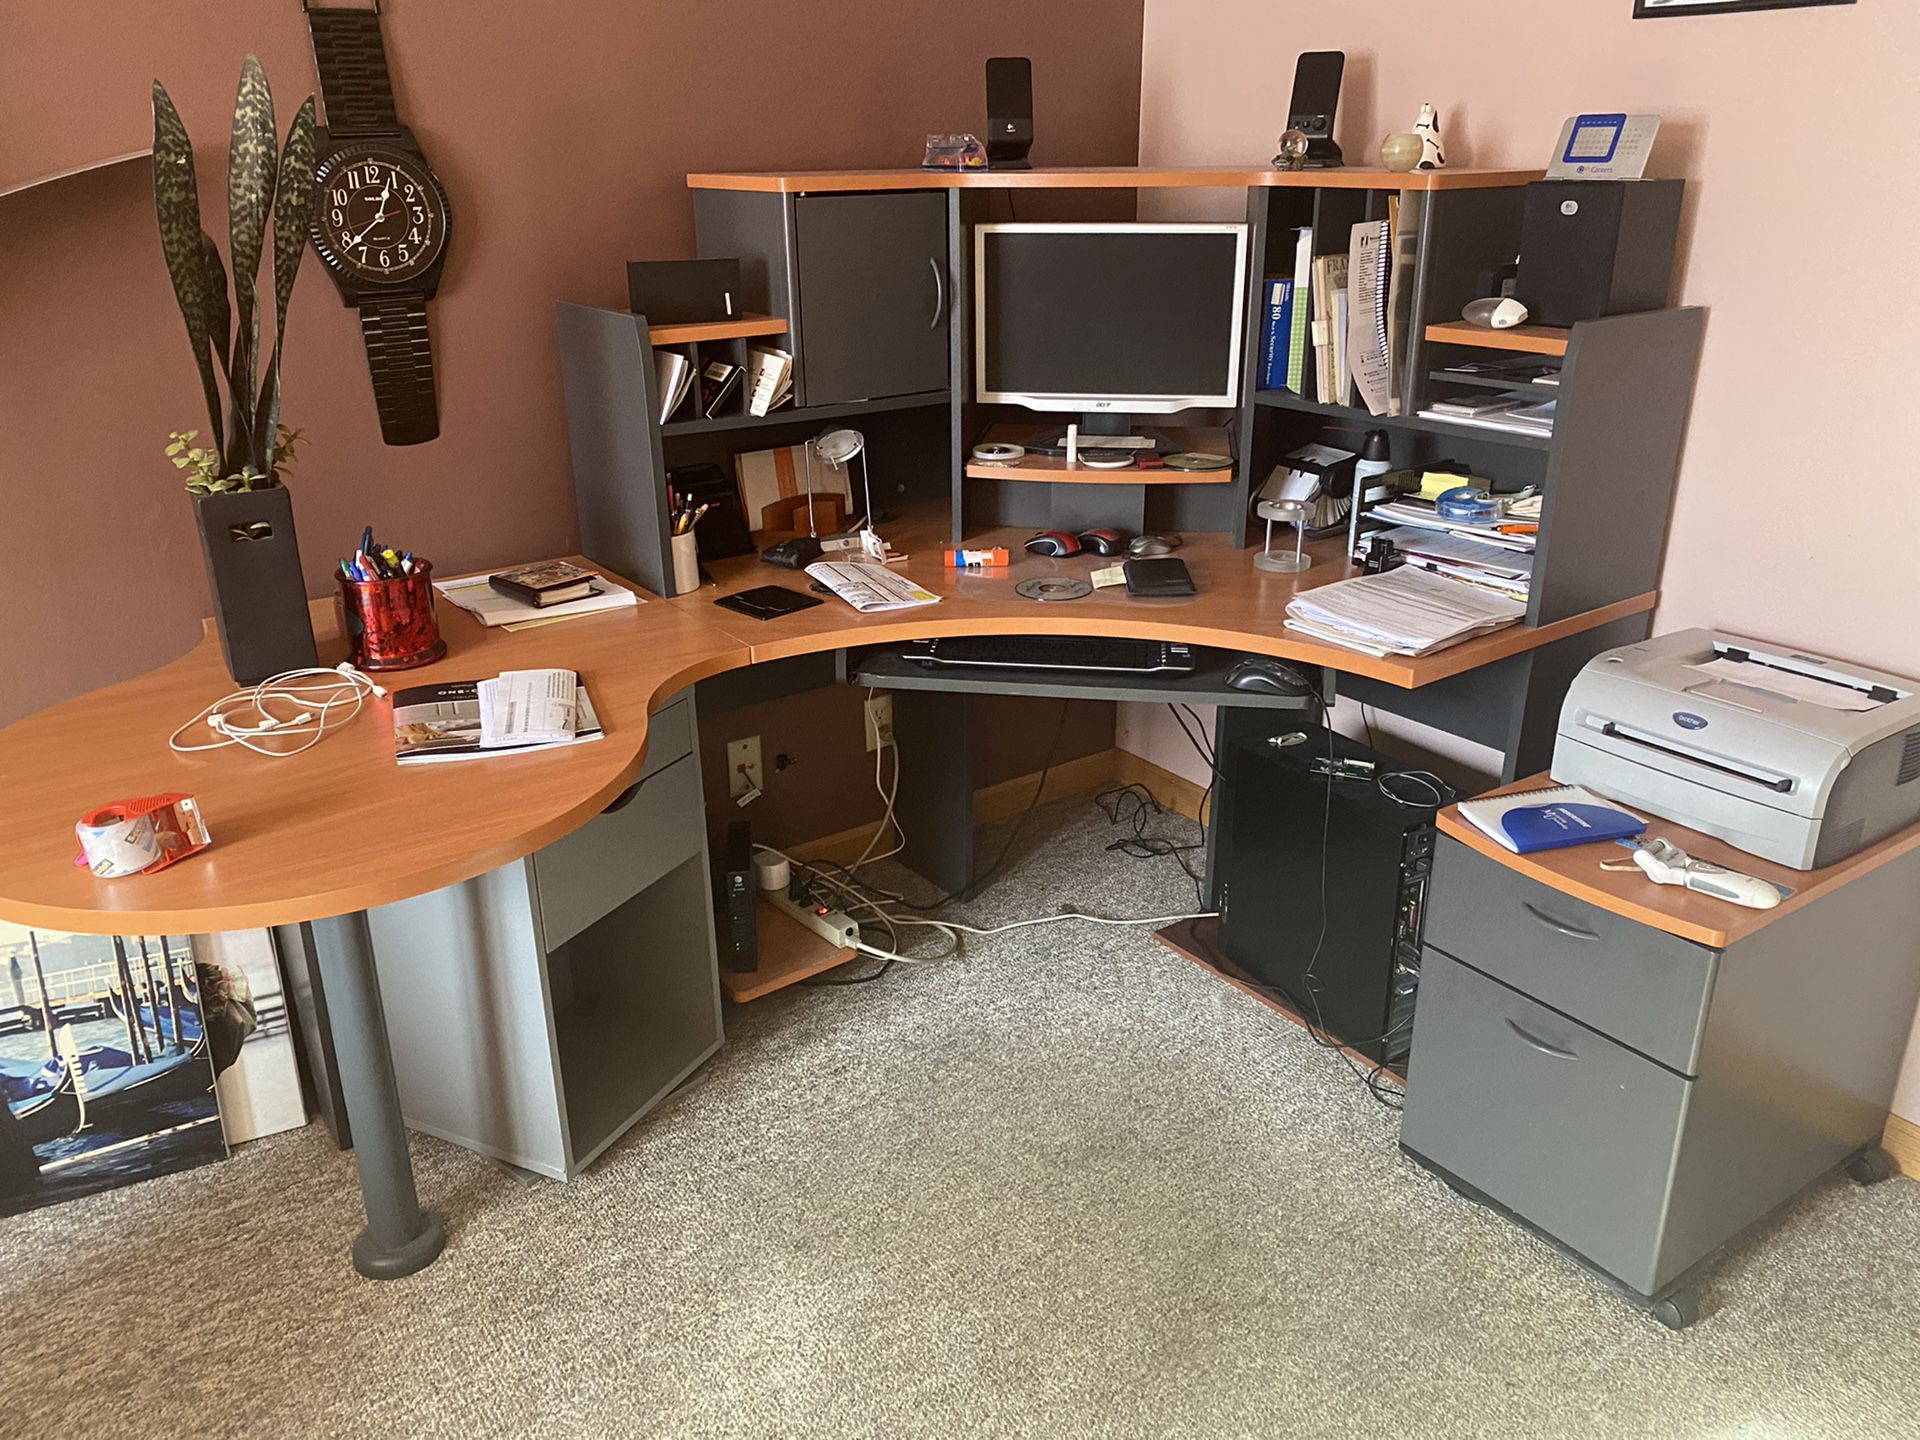 Computer desk / table with filing cabinets